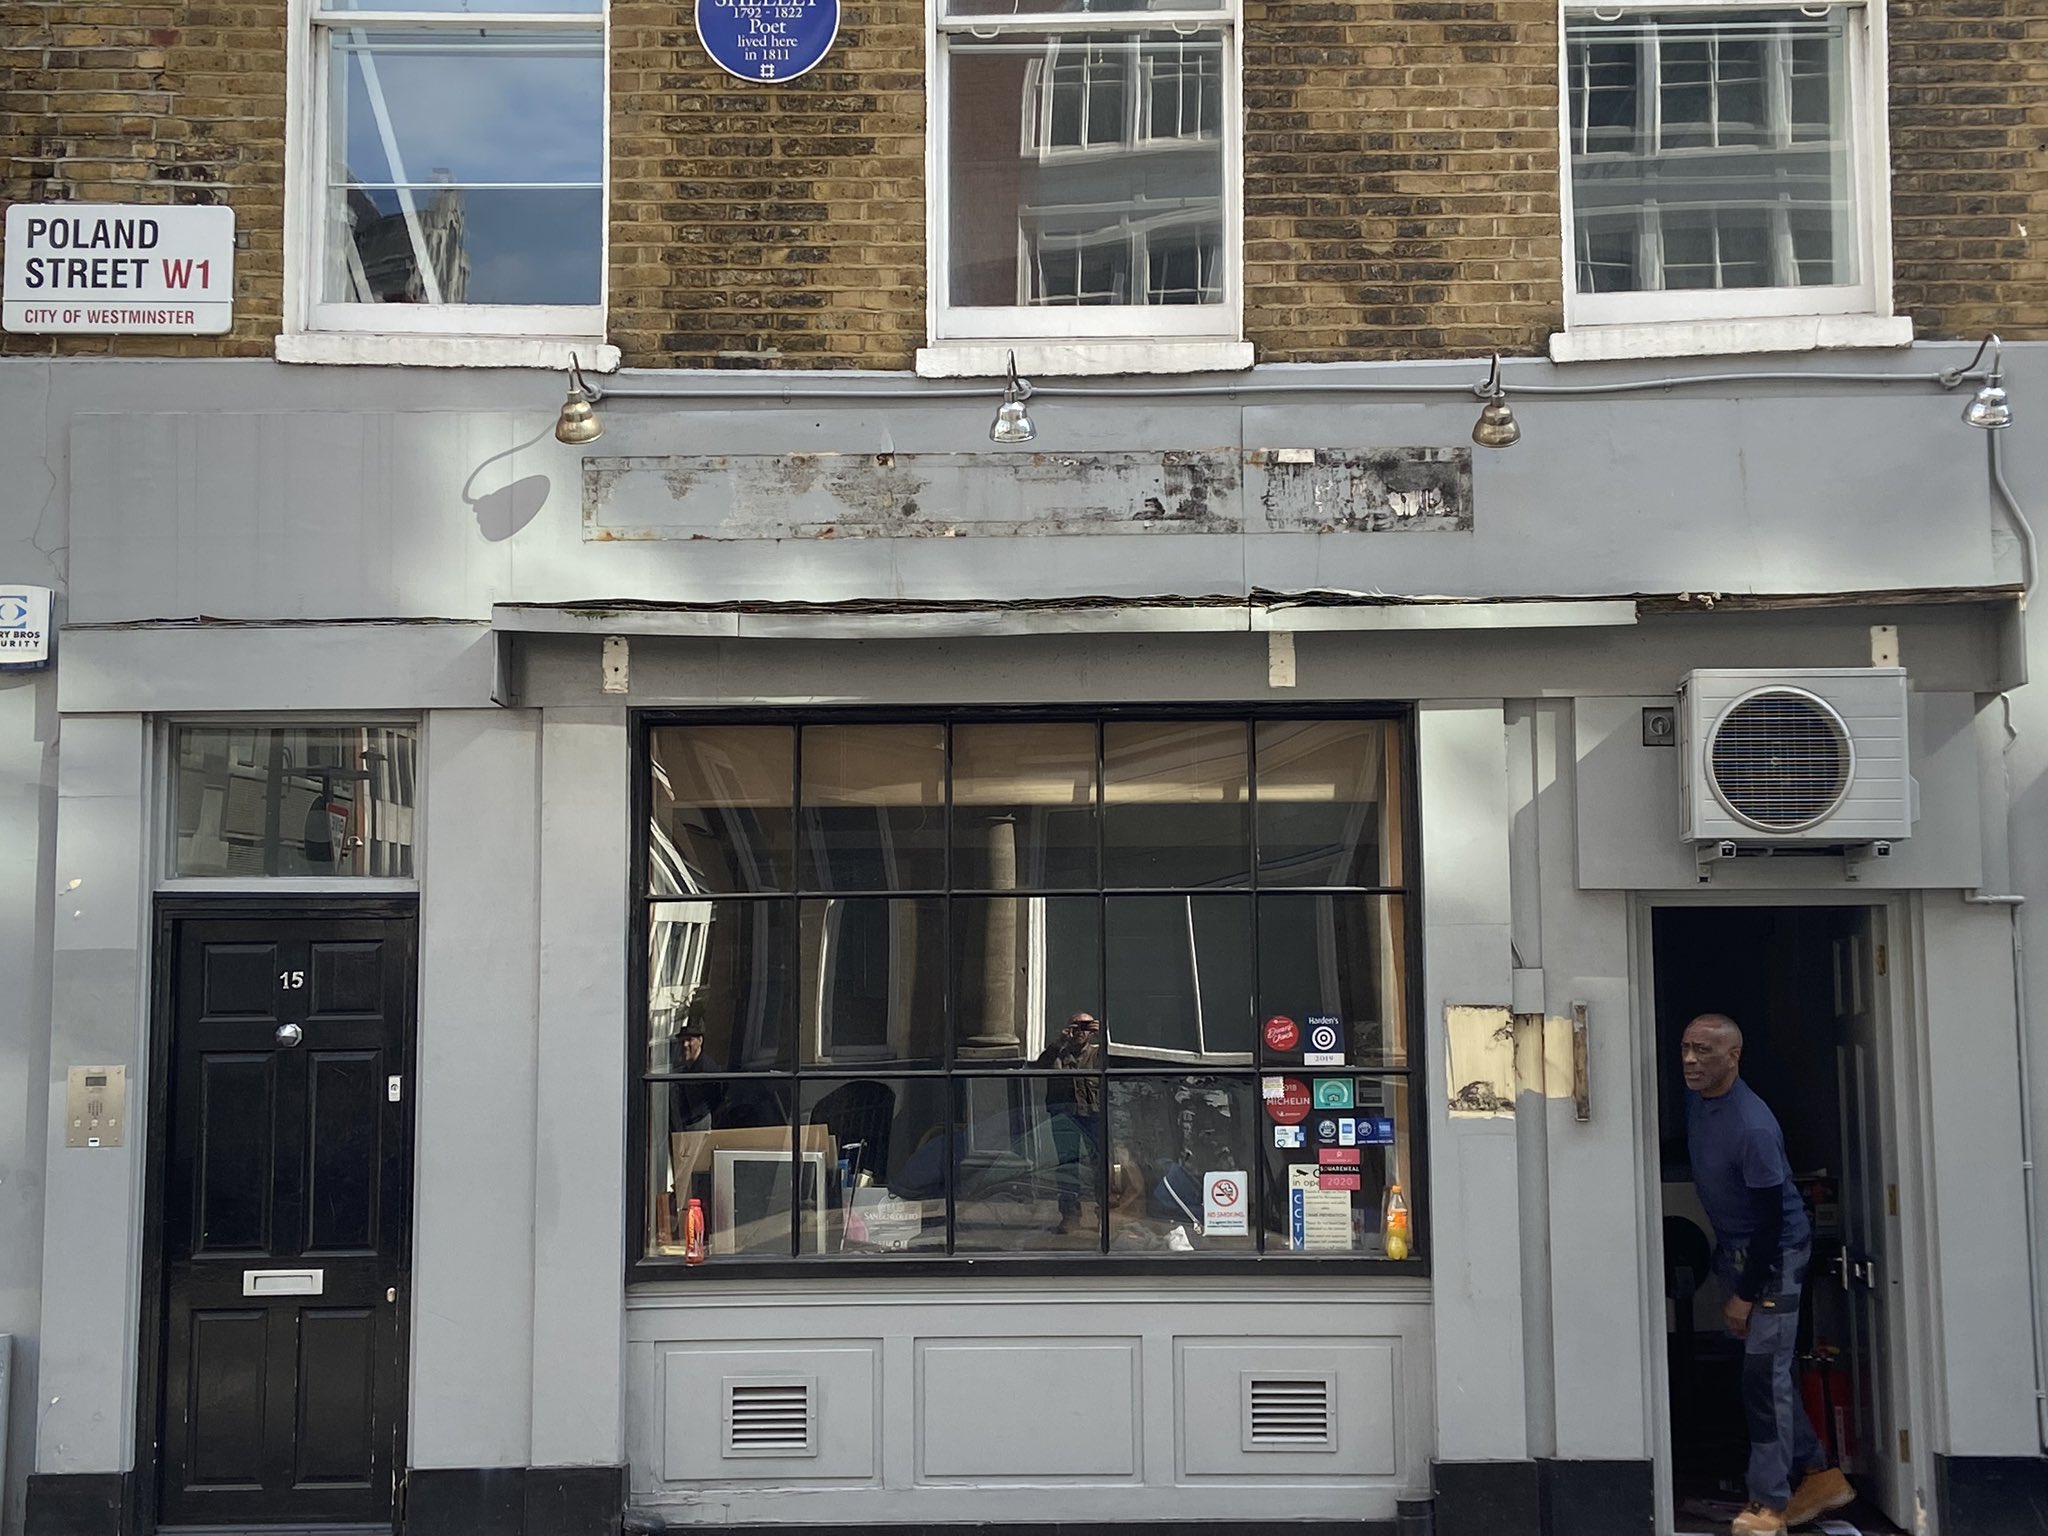 Vasco and Piero’s Pavillion —&nbsp;one of Soho’s best loved restaurants has closed on Poland Street, its sign was removed by builders on 27 April 2021